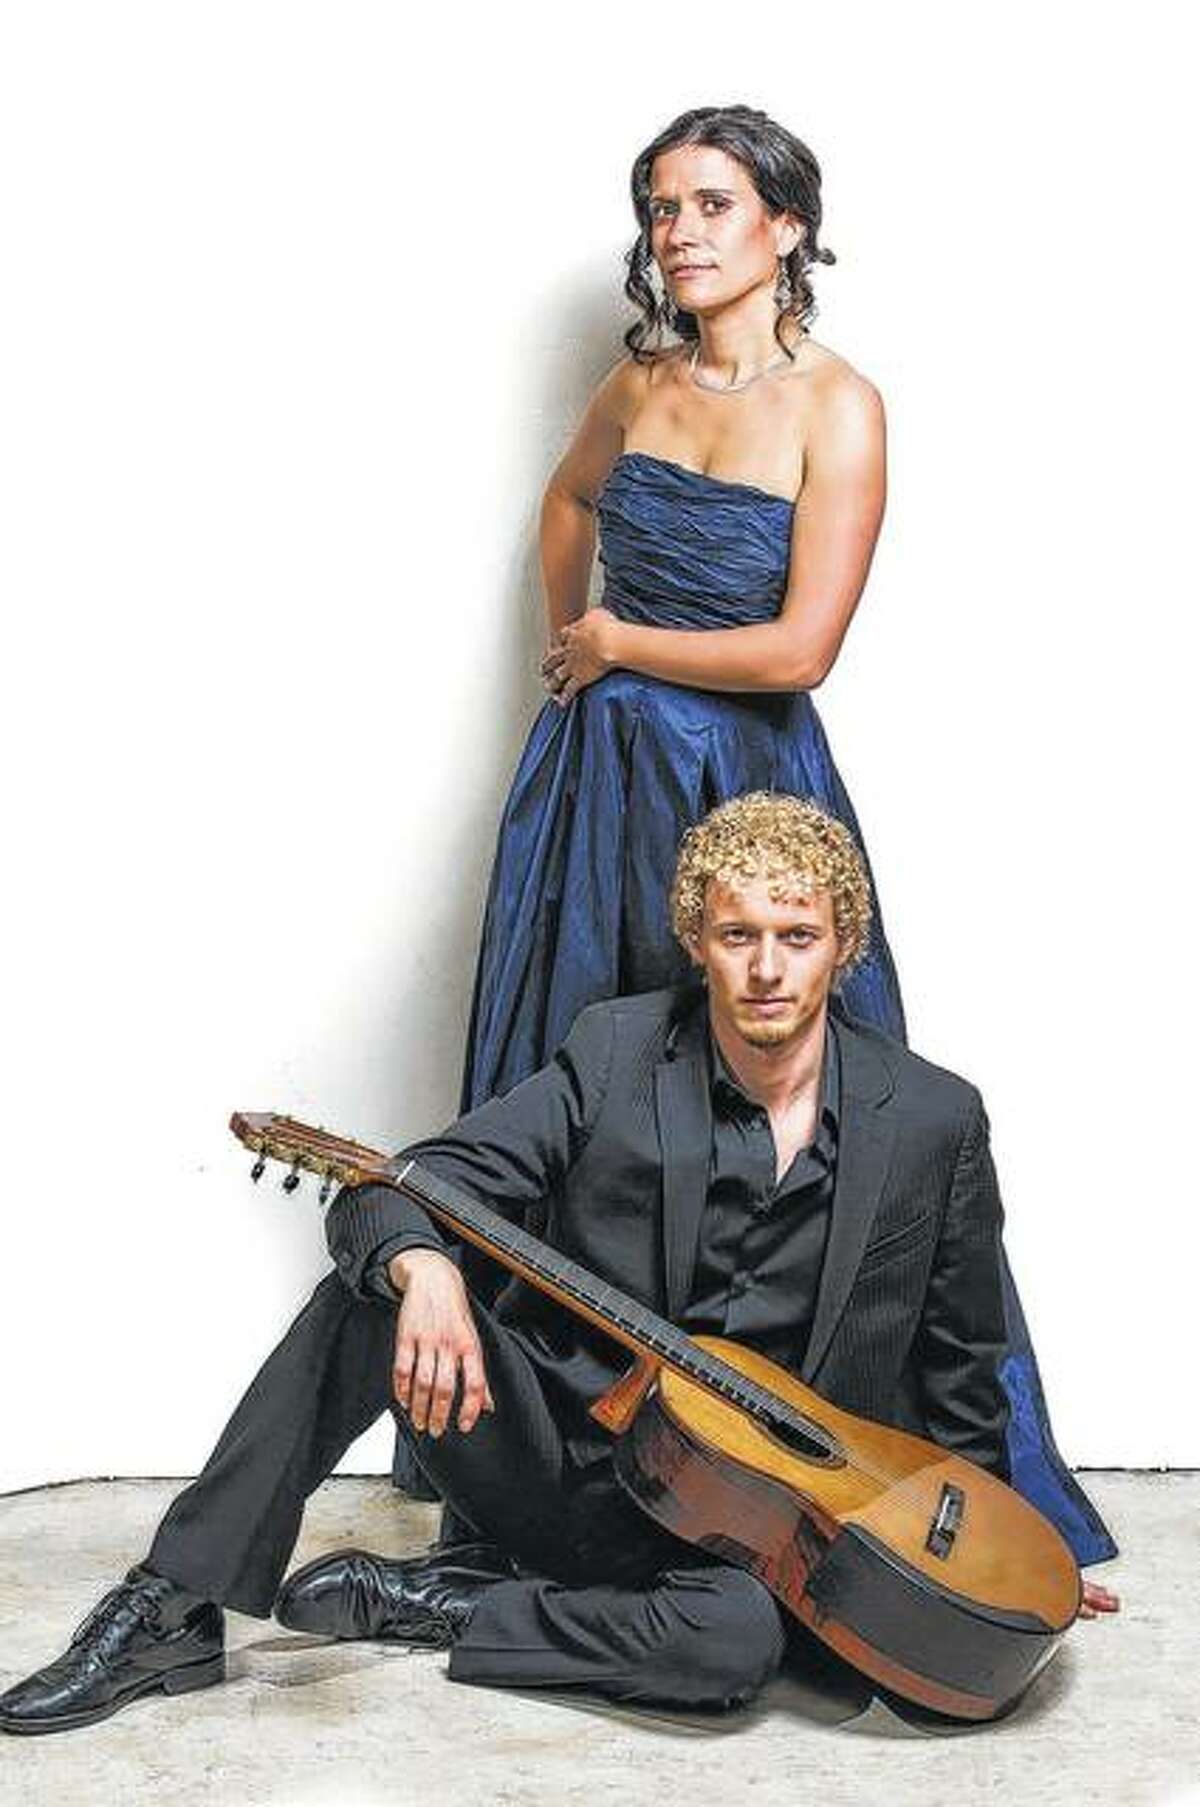 Laura Fraticelli and Johannes Möller make up the Möller-Fraticelli Guitar Duo, a classical guitar pairing that blends Möller’s Swedish roots and Fraticelli’s Argentinean roots into a sound that is uniquely theirs. The duo will perform Wednesday at Illinois College as the opening concert for IC’s Engelbach-Hart Music Festival.